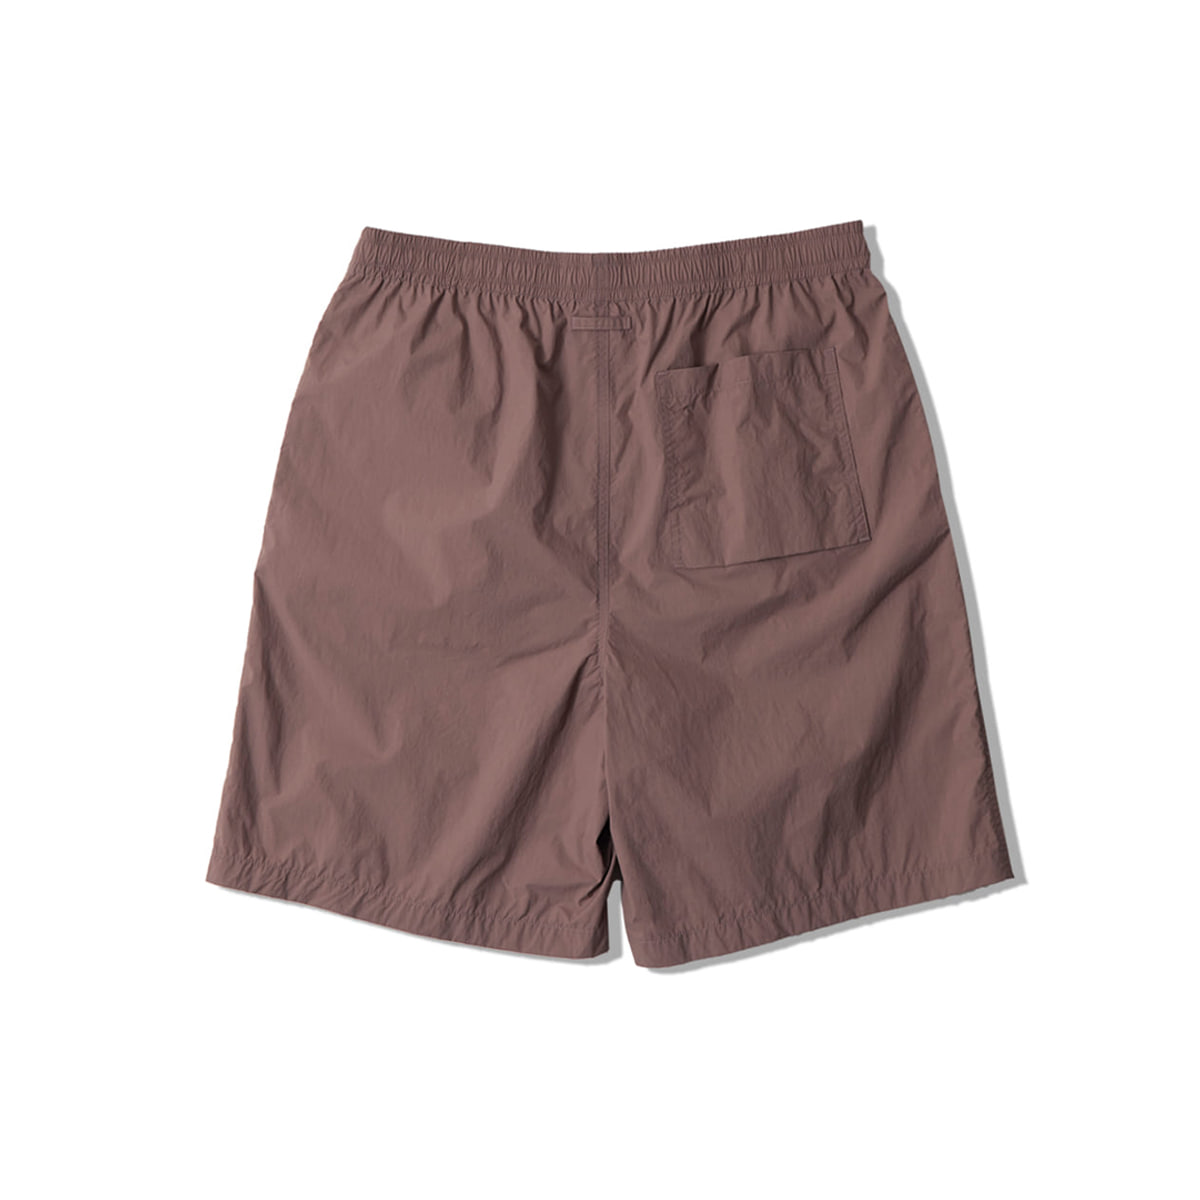 [NEITHERS] S MEDICAL SHORTS &#039;BROWN&#039;